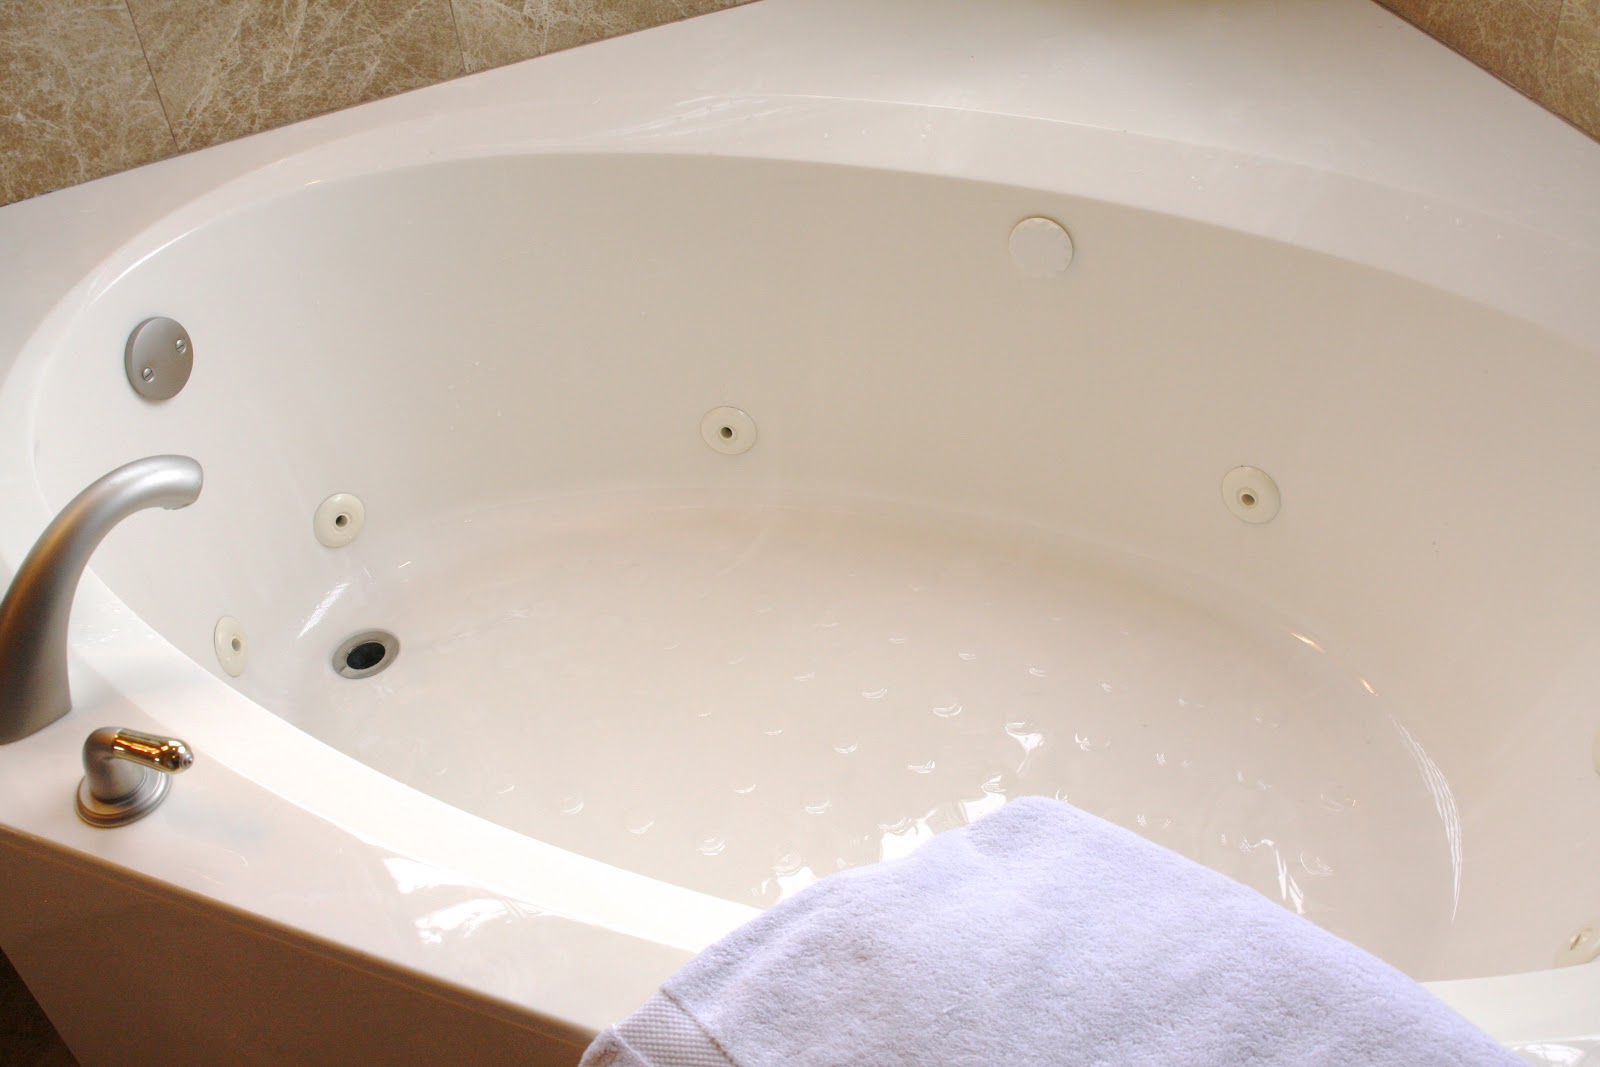 How To Clean Whirlpool Tub Jets, Best Way To Clean Jacuzzi Bathtub Jets